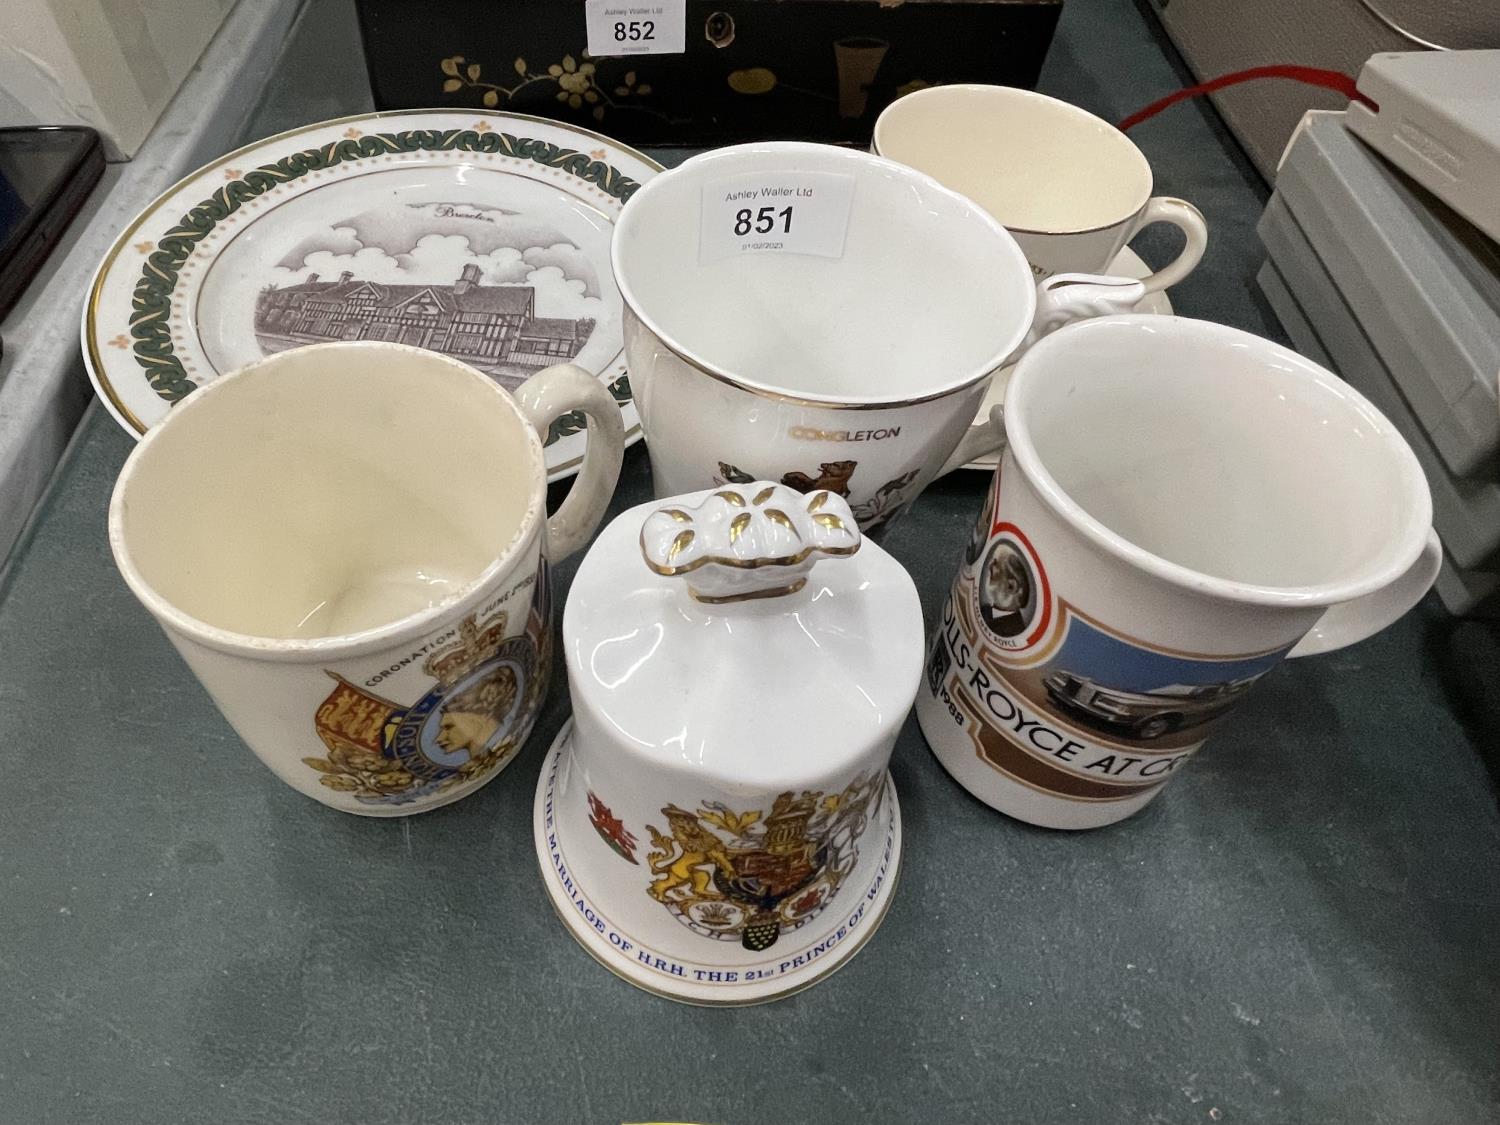 A QUANTITY OF ROYAL COMMEMORATIVE ITEMS TO INCLUDE MUGS, CUPS, A BELL AND A PLATE